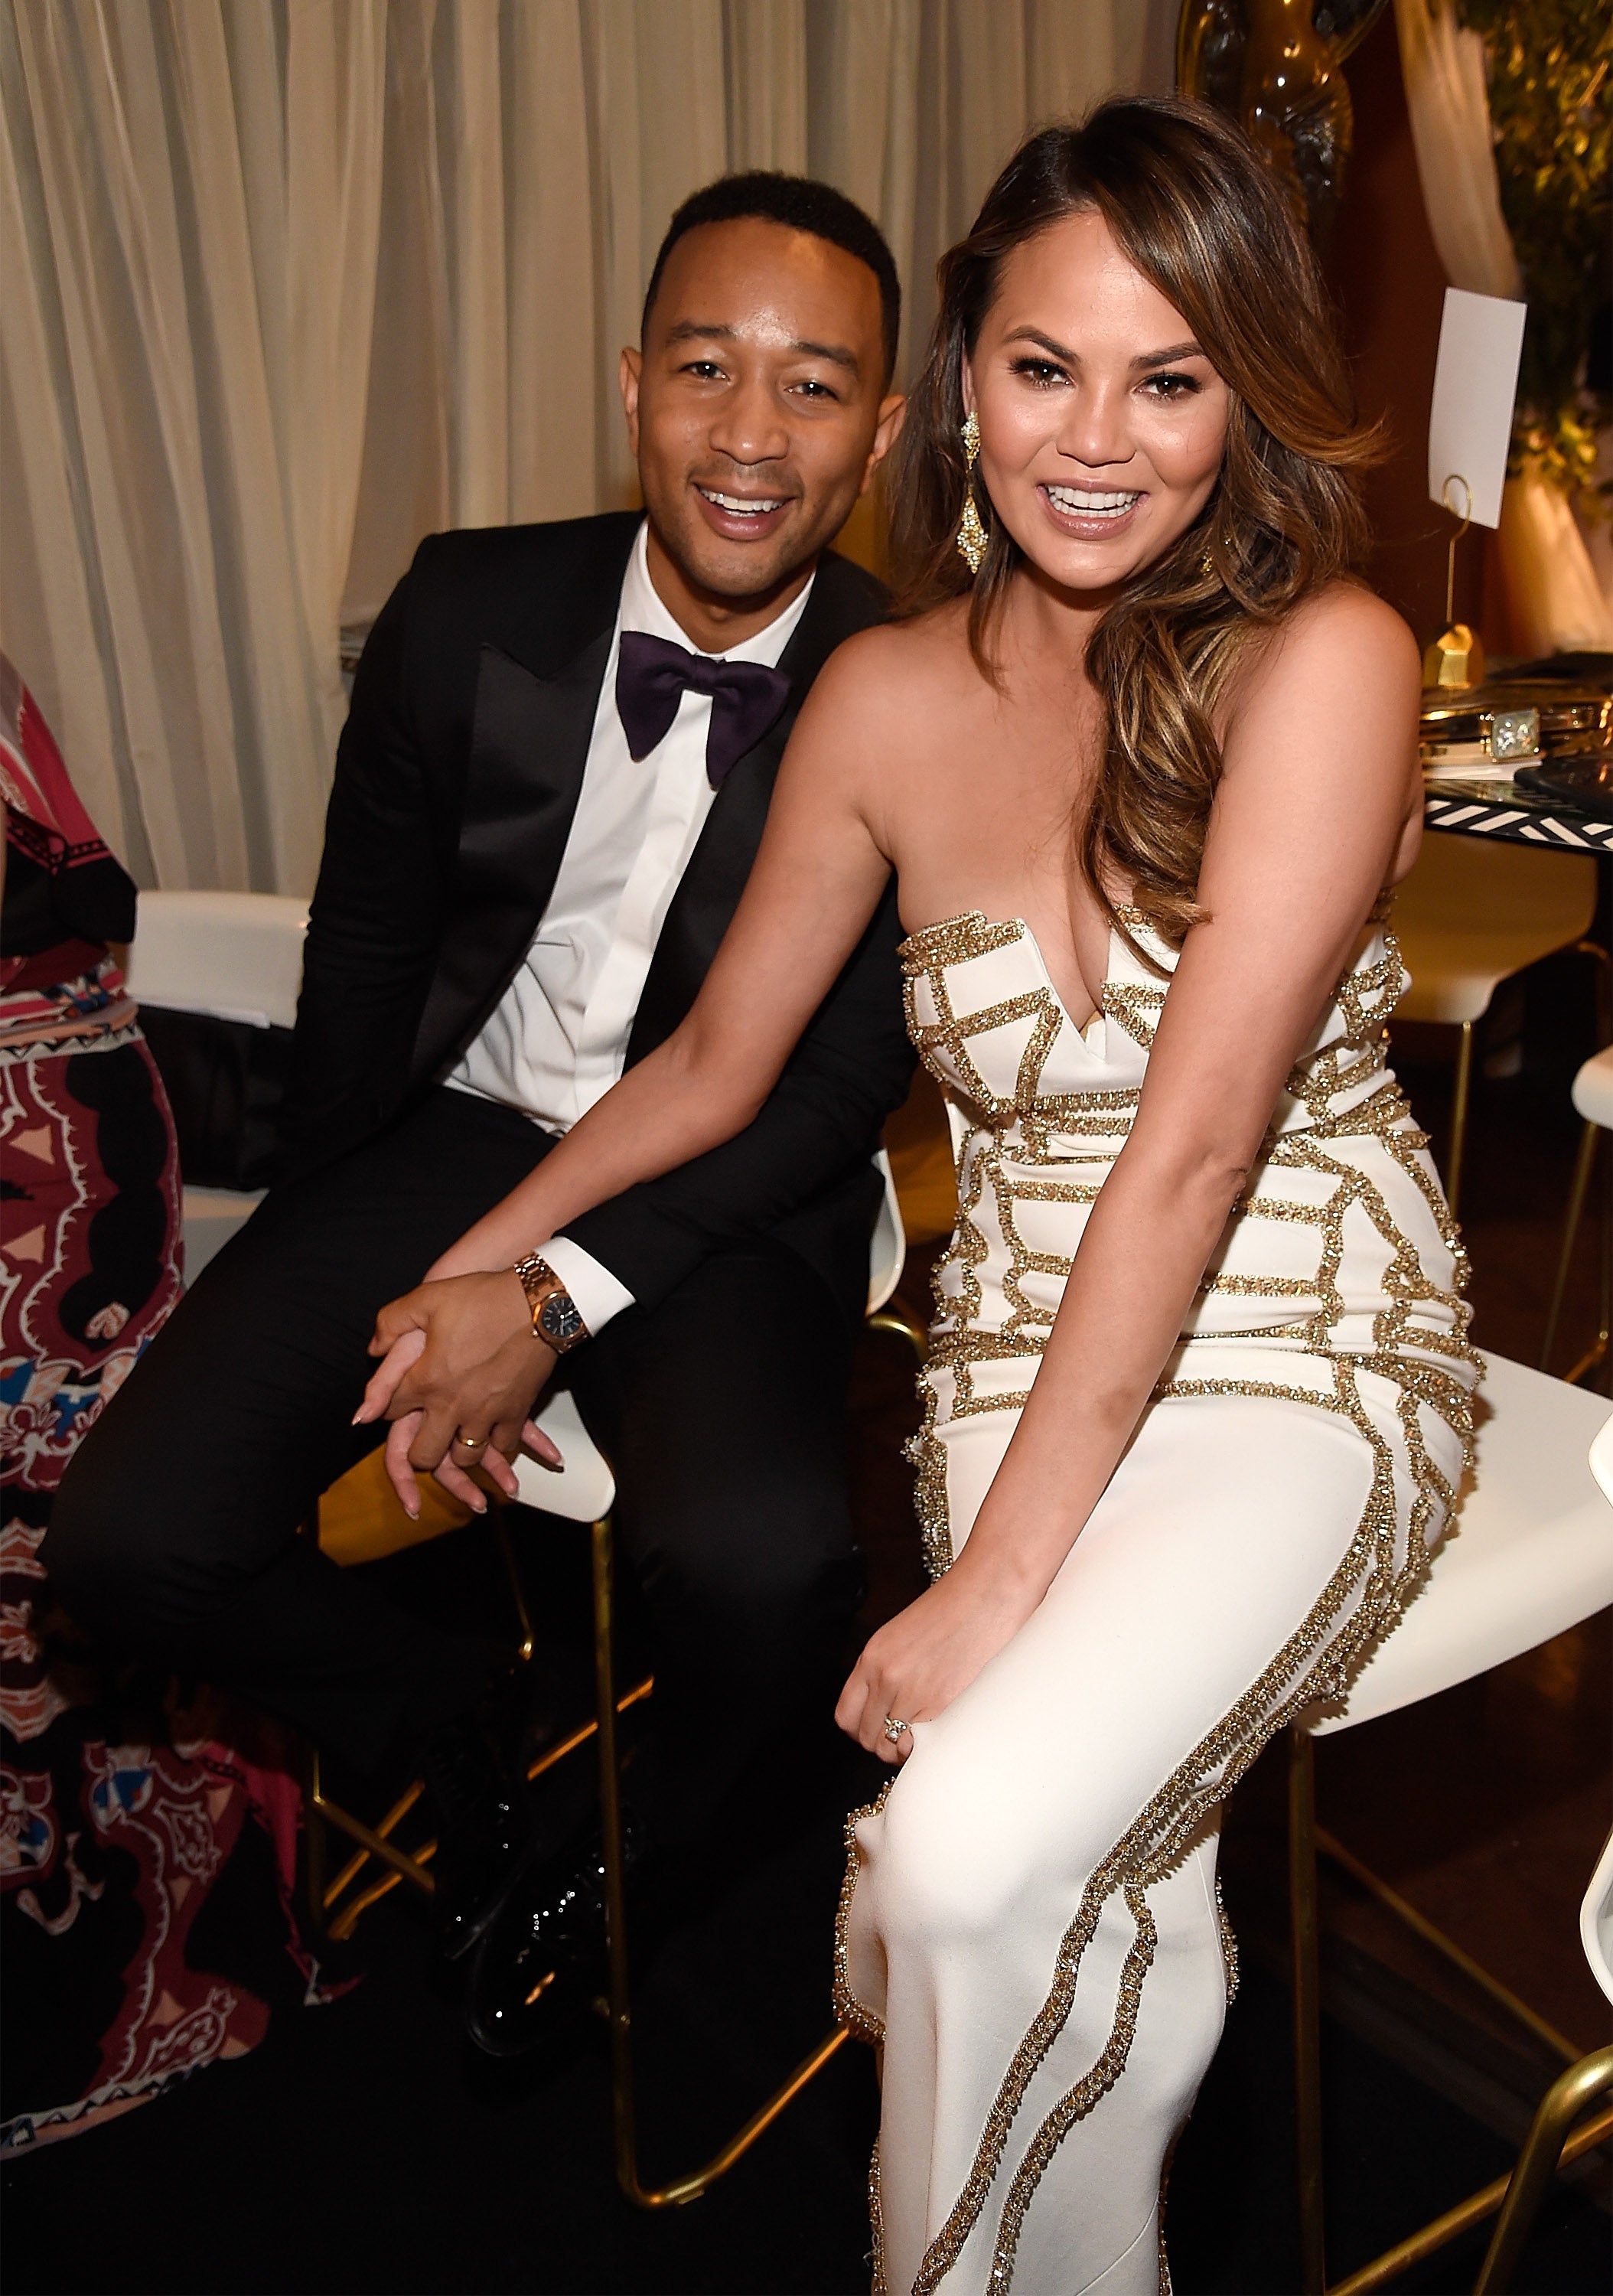 Finally! Chrissy Teigen Joins John Legend On Stage For The Moment Fans Have Been Waiting For